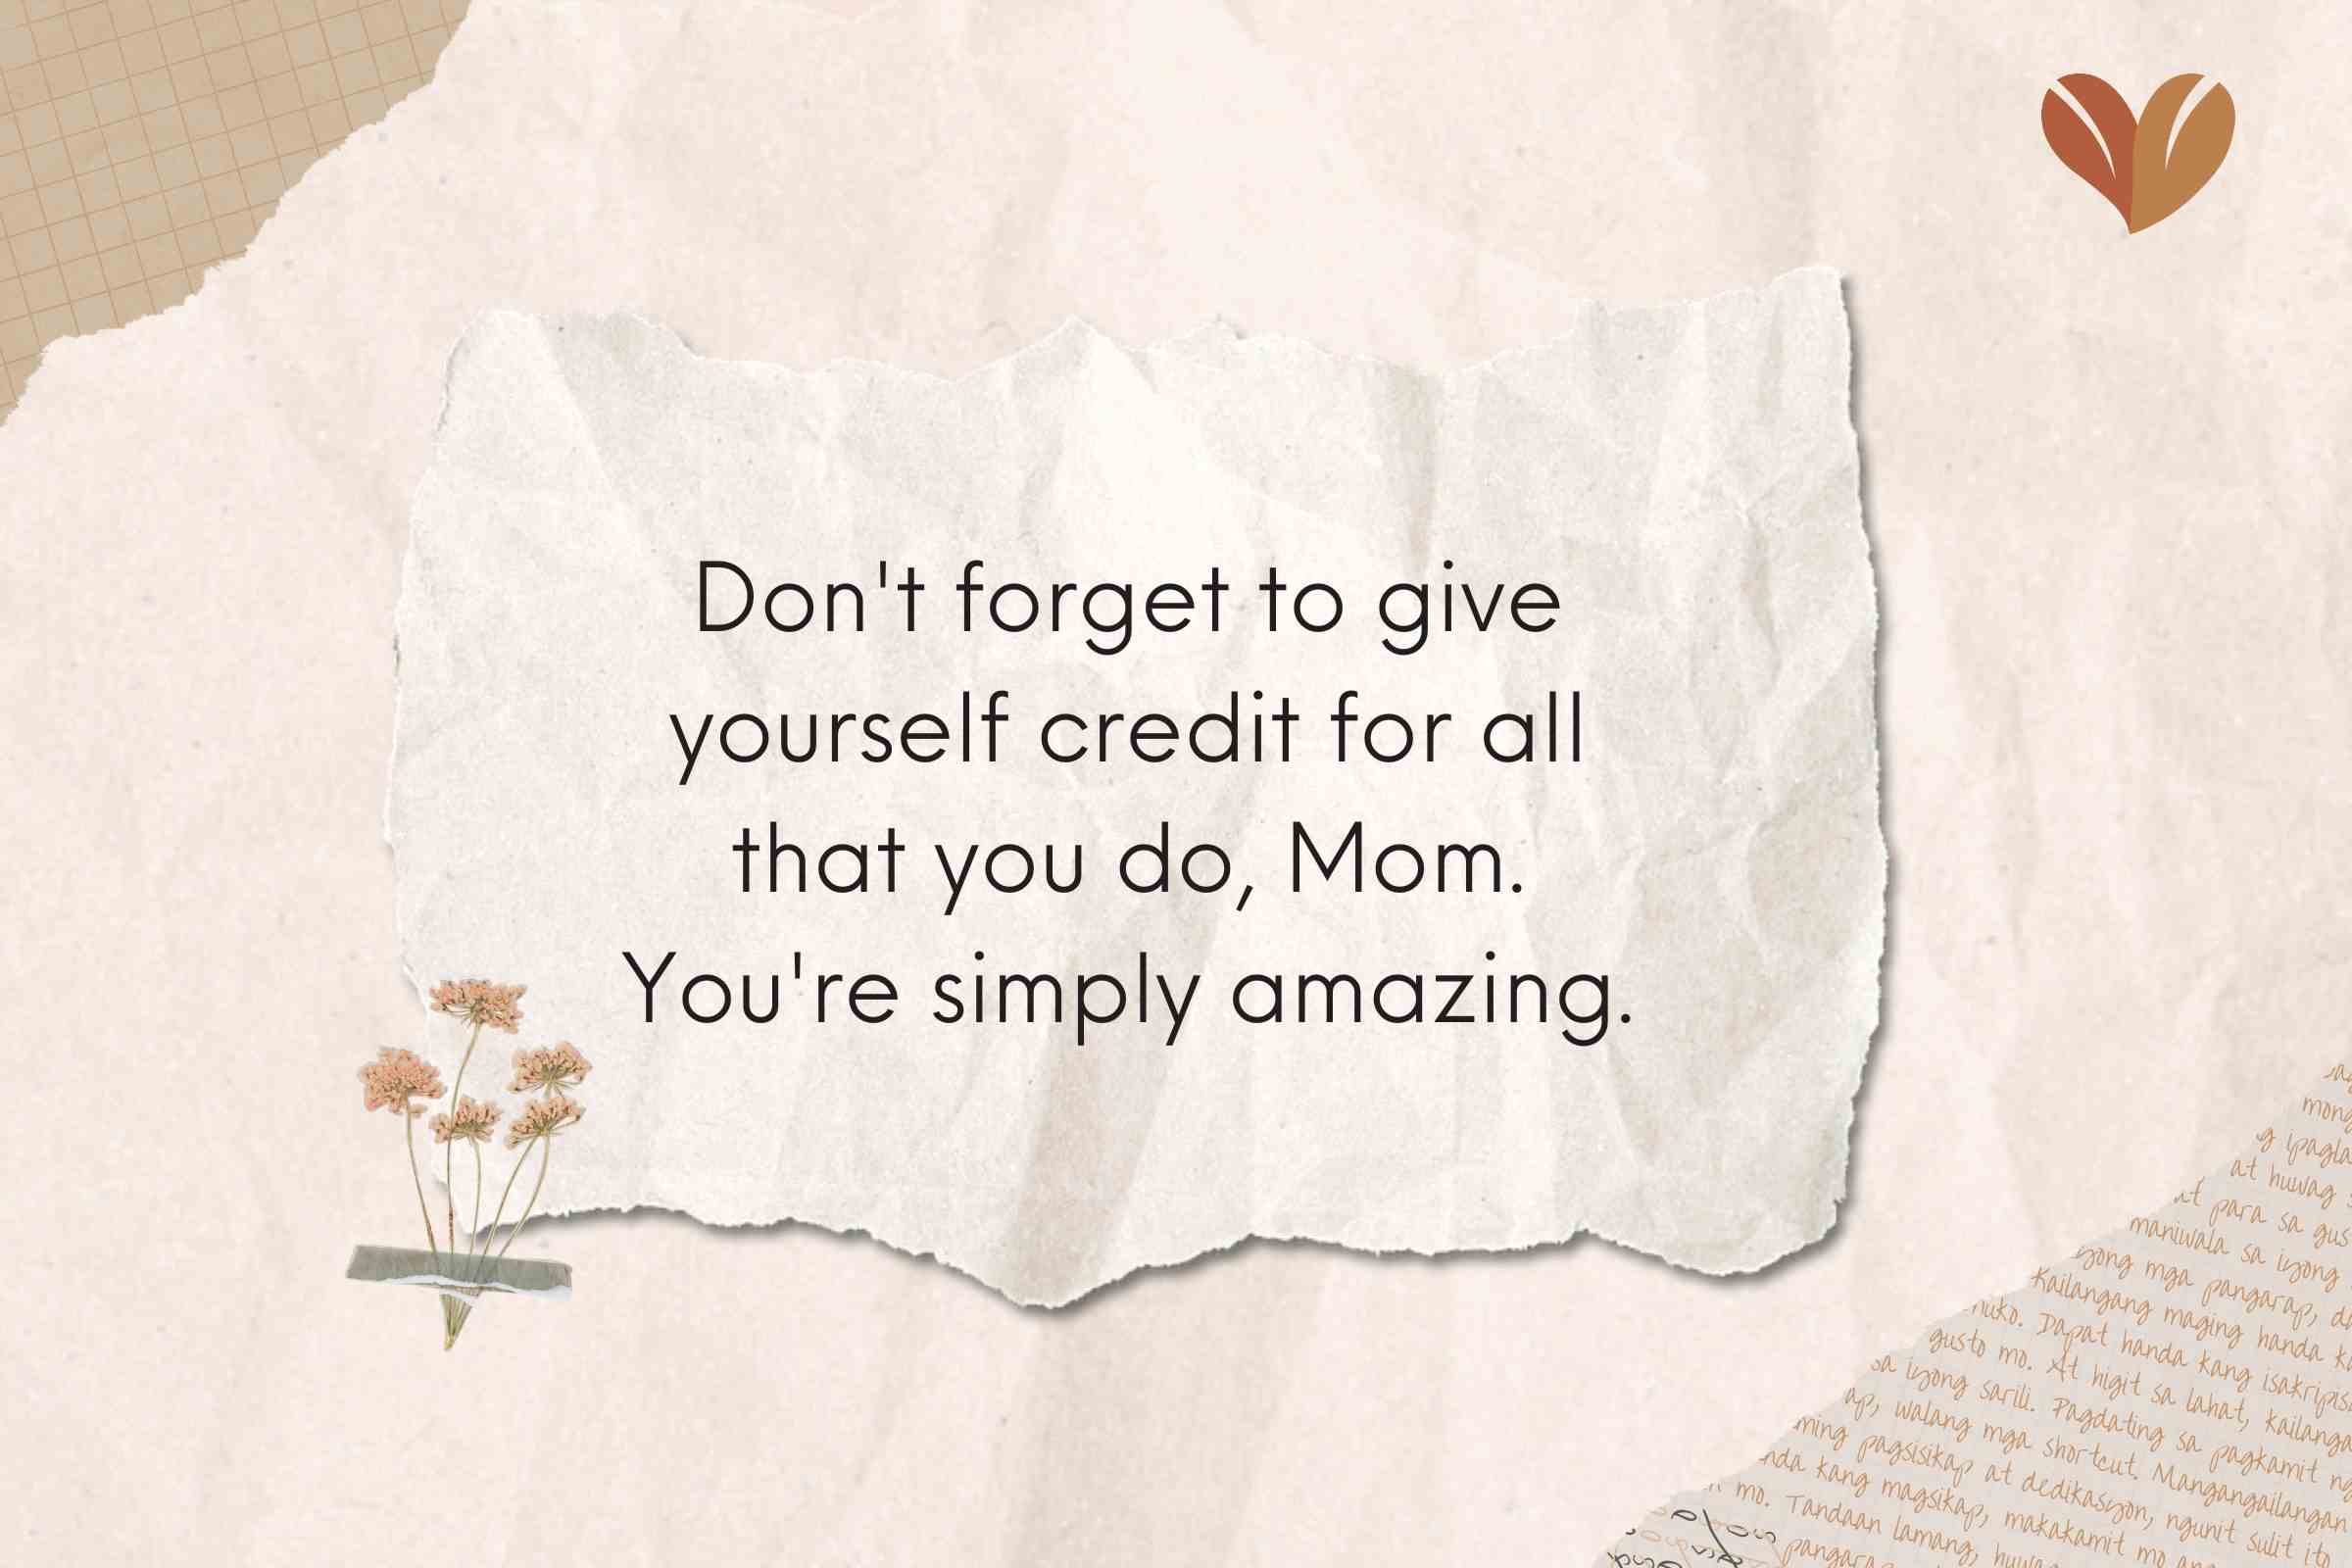 Don't forget to give yourself credit for all that you do, Mom. You're simply amazing.